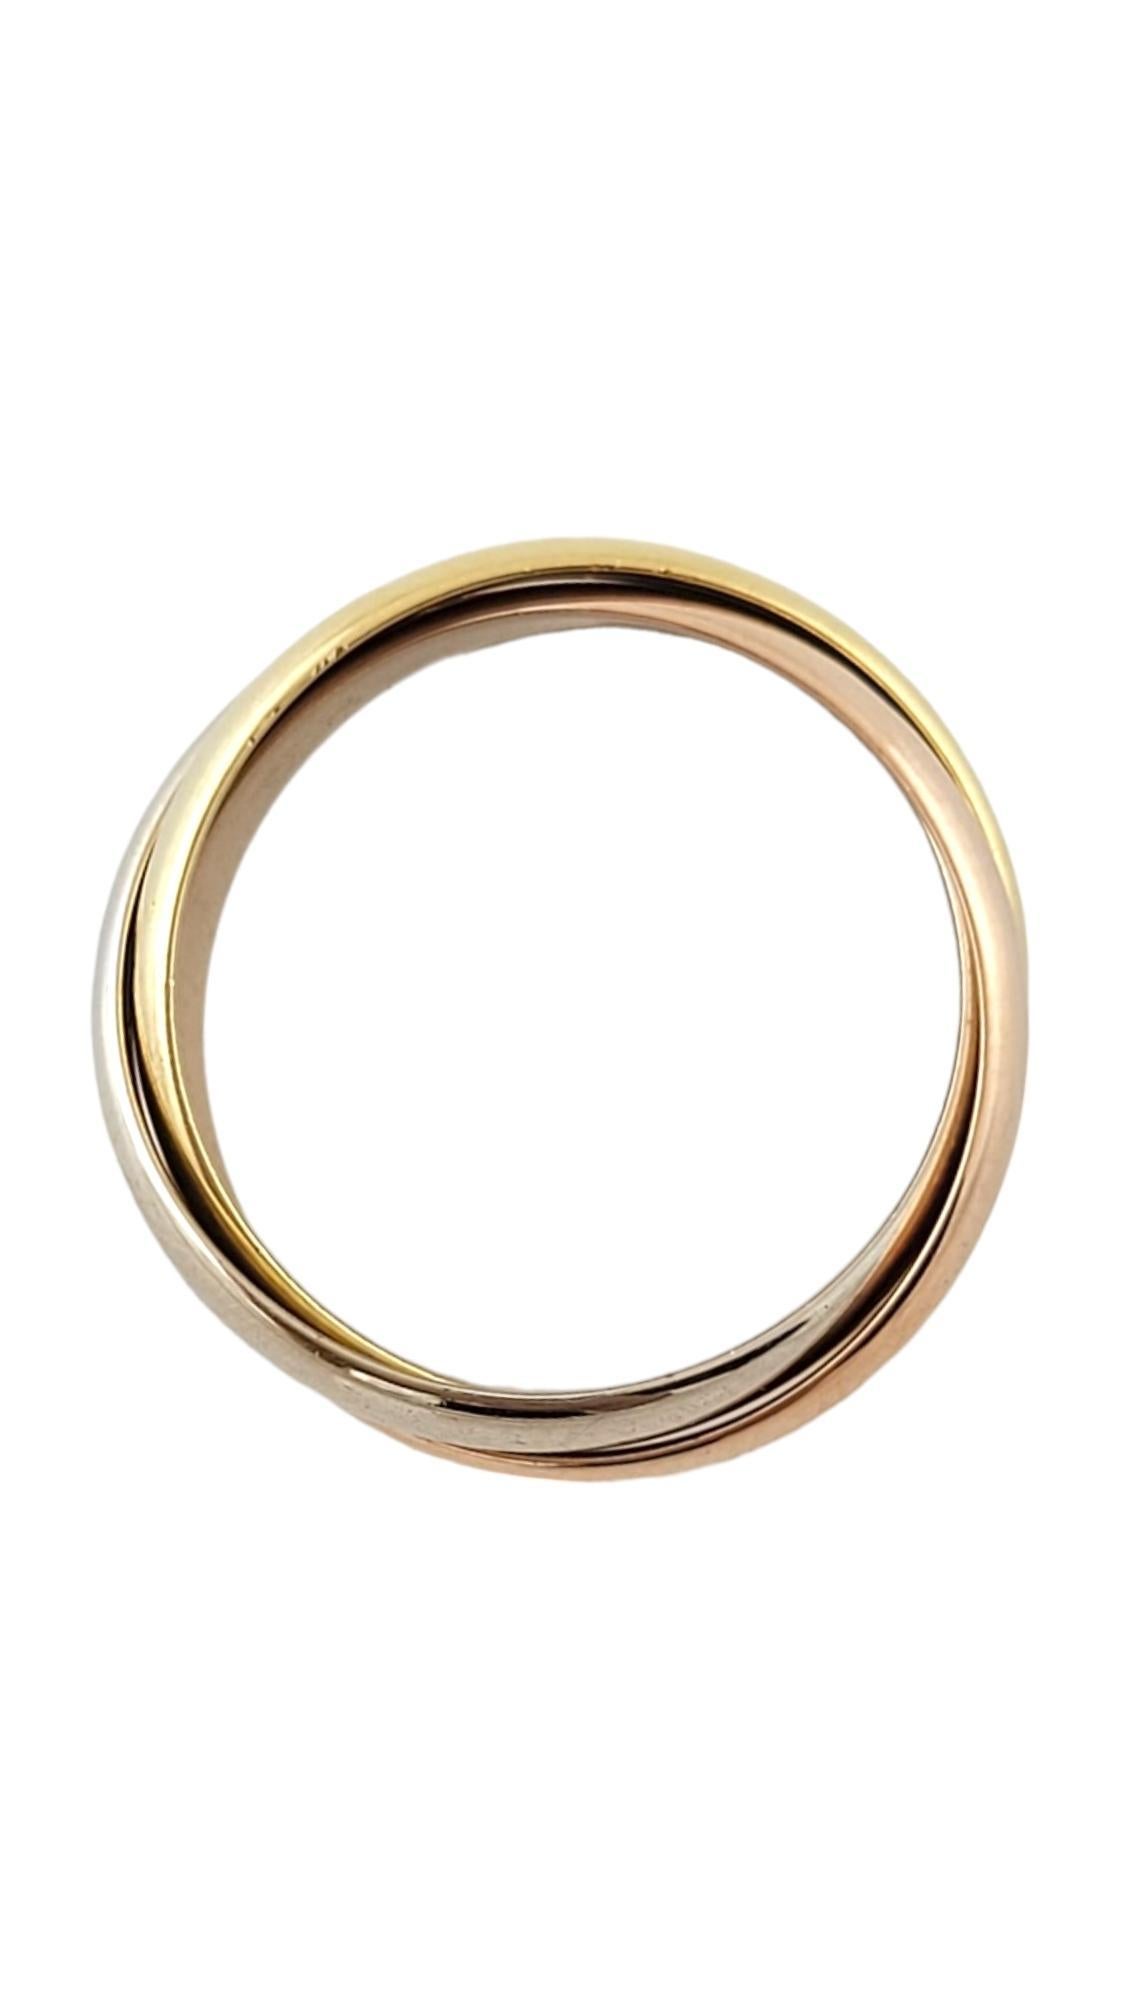 18K Tri Colored Gold Wide Rolling Ring Size 6.5

This gorgeous rolling ring has 3 beautiful bands crafted from 18K yellow, white, and rose gold!

Ring size: 6.5
Shank: 3.5mm (each band)
Shank: 7.1mm total

Weight: 4.3 dwt/ 6.7 g

Tested 18K

Very